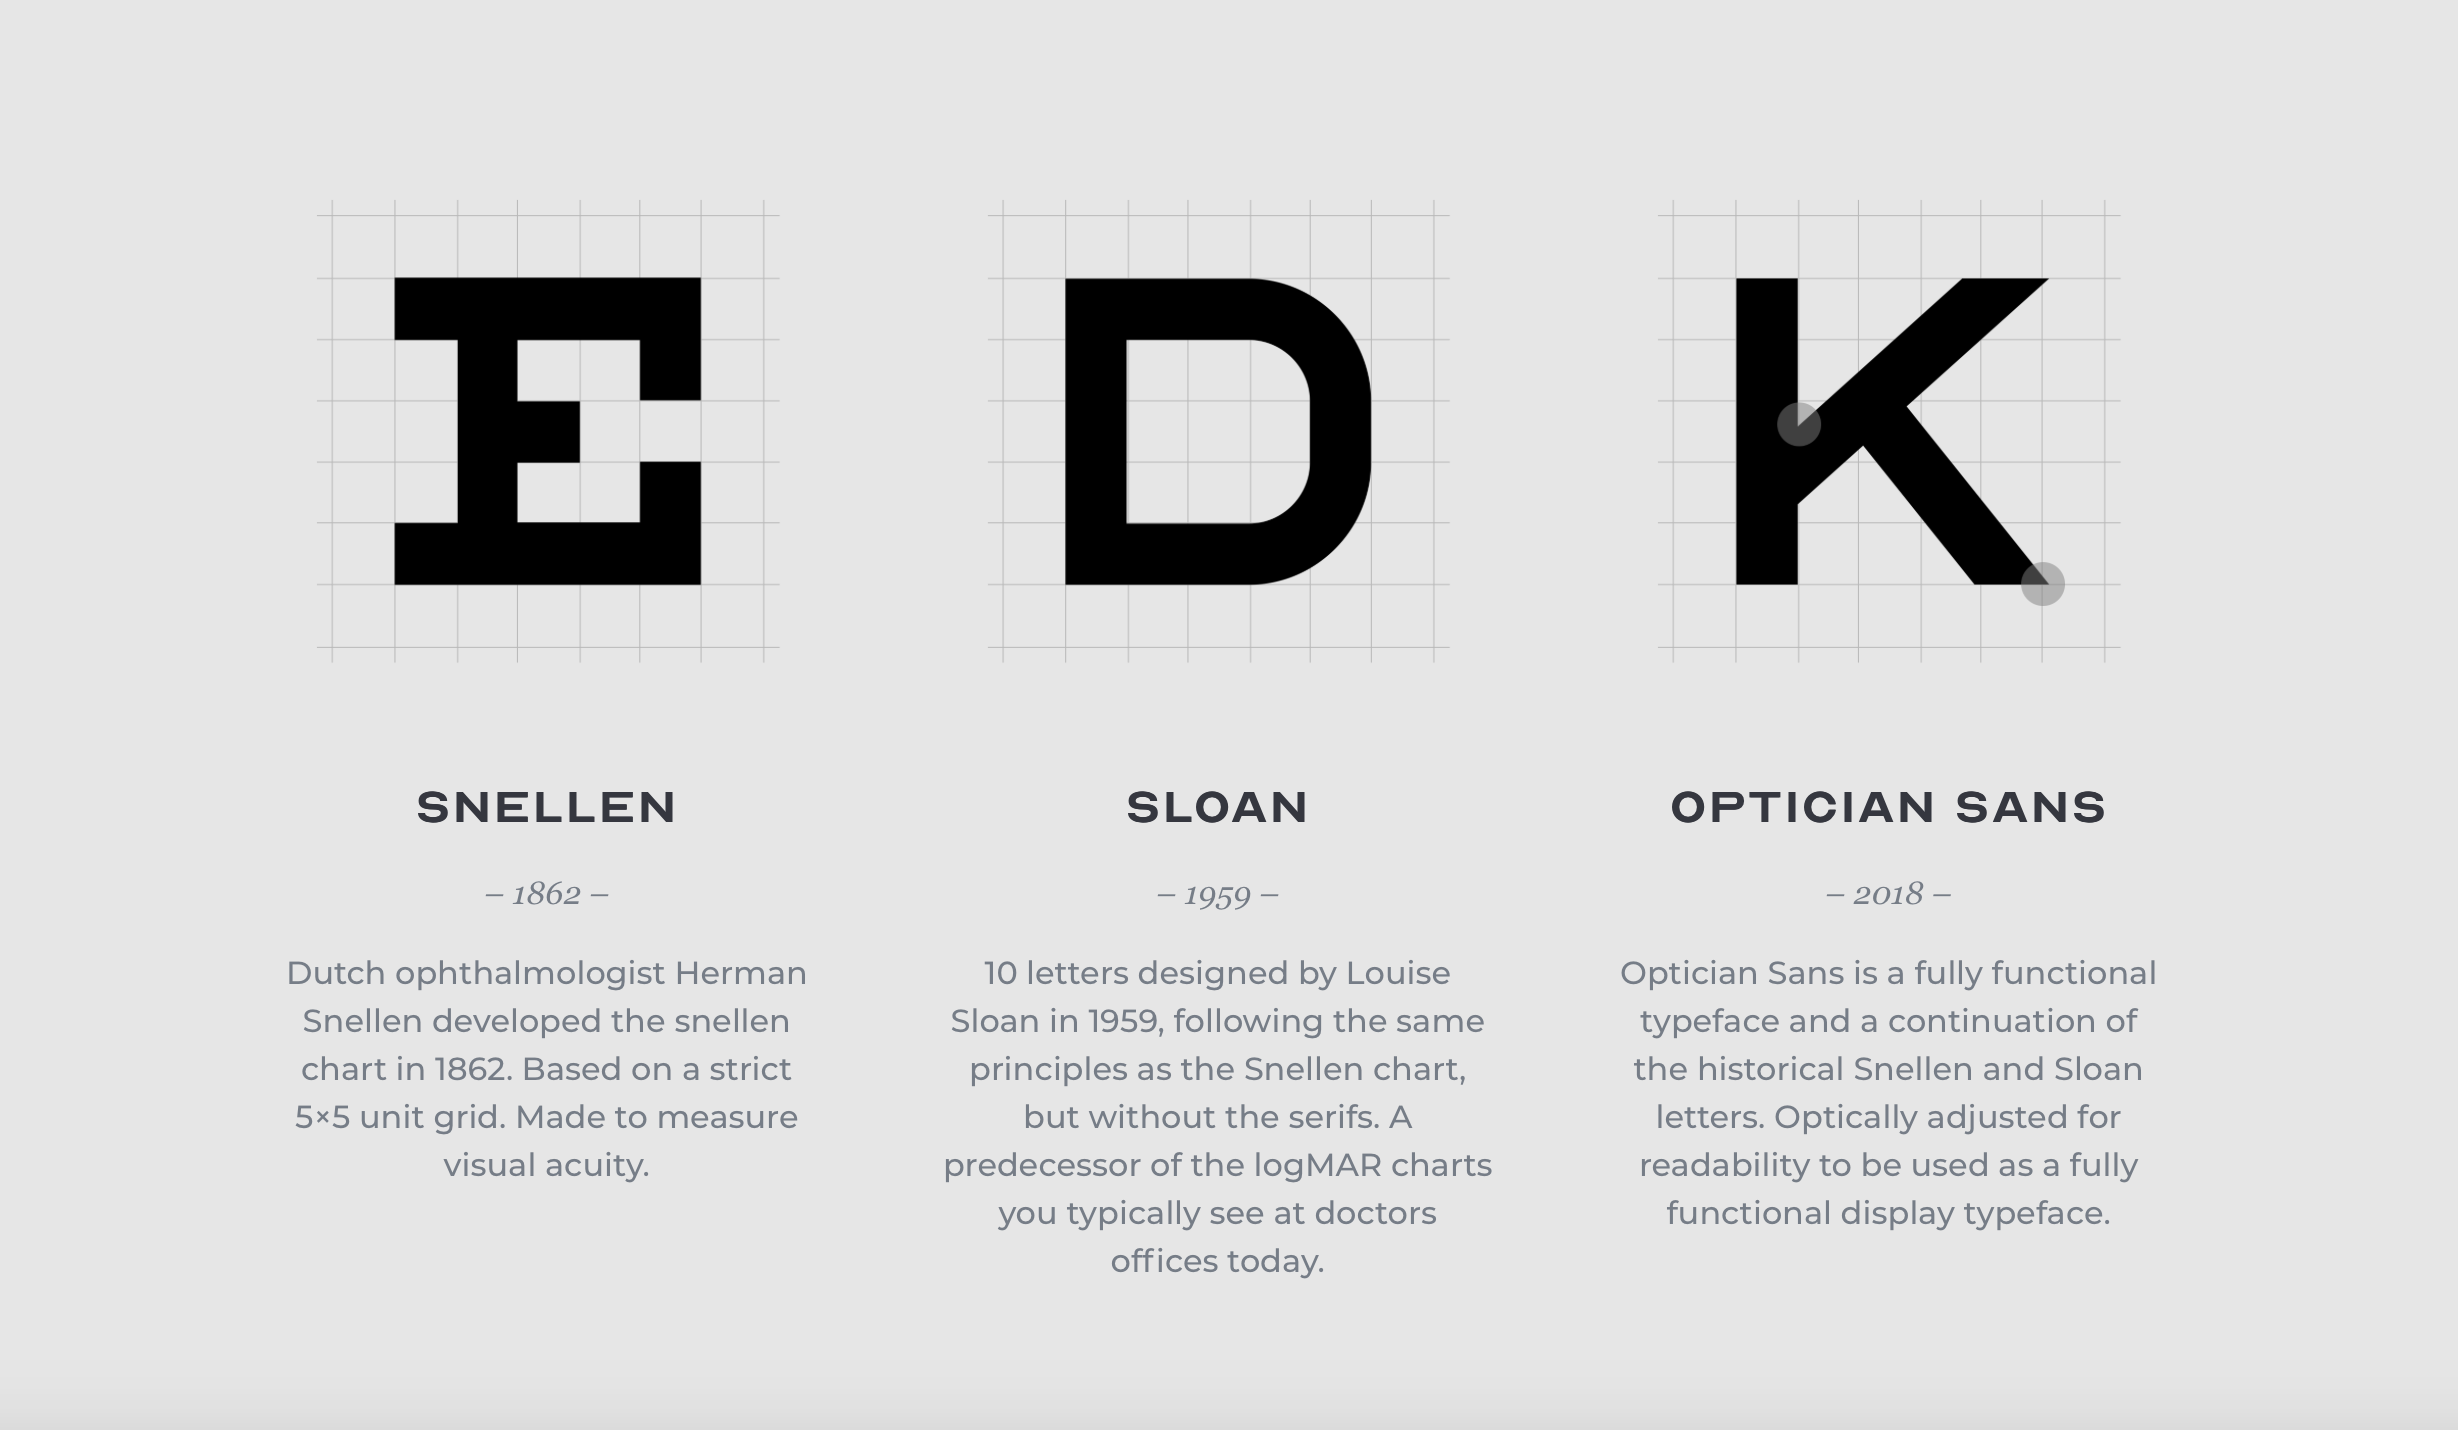 Snellen chart was developed in 1862 to measure visual acuity. Sloan chart was developed in 1952, with the same proportions, but without serifs. Optician Sans was developed in 2018 as fully functional facetype (originally for branding for the optical store in Norway).